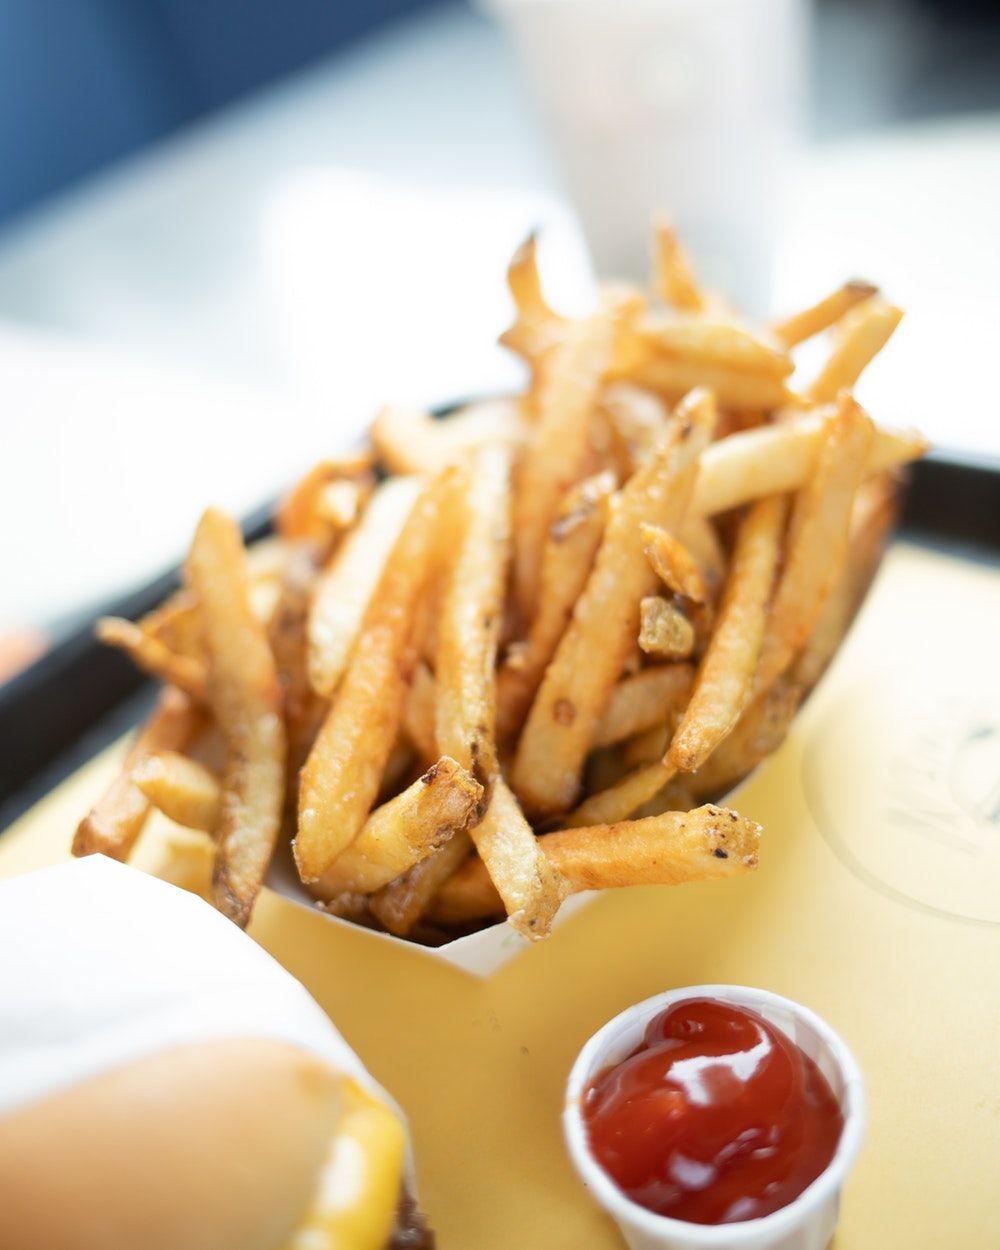 French Fry Picture. Download Free Image